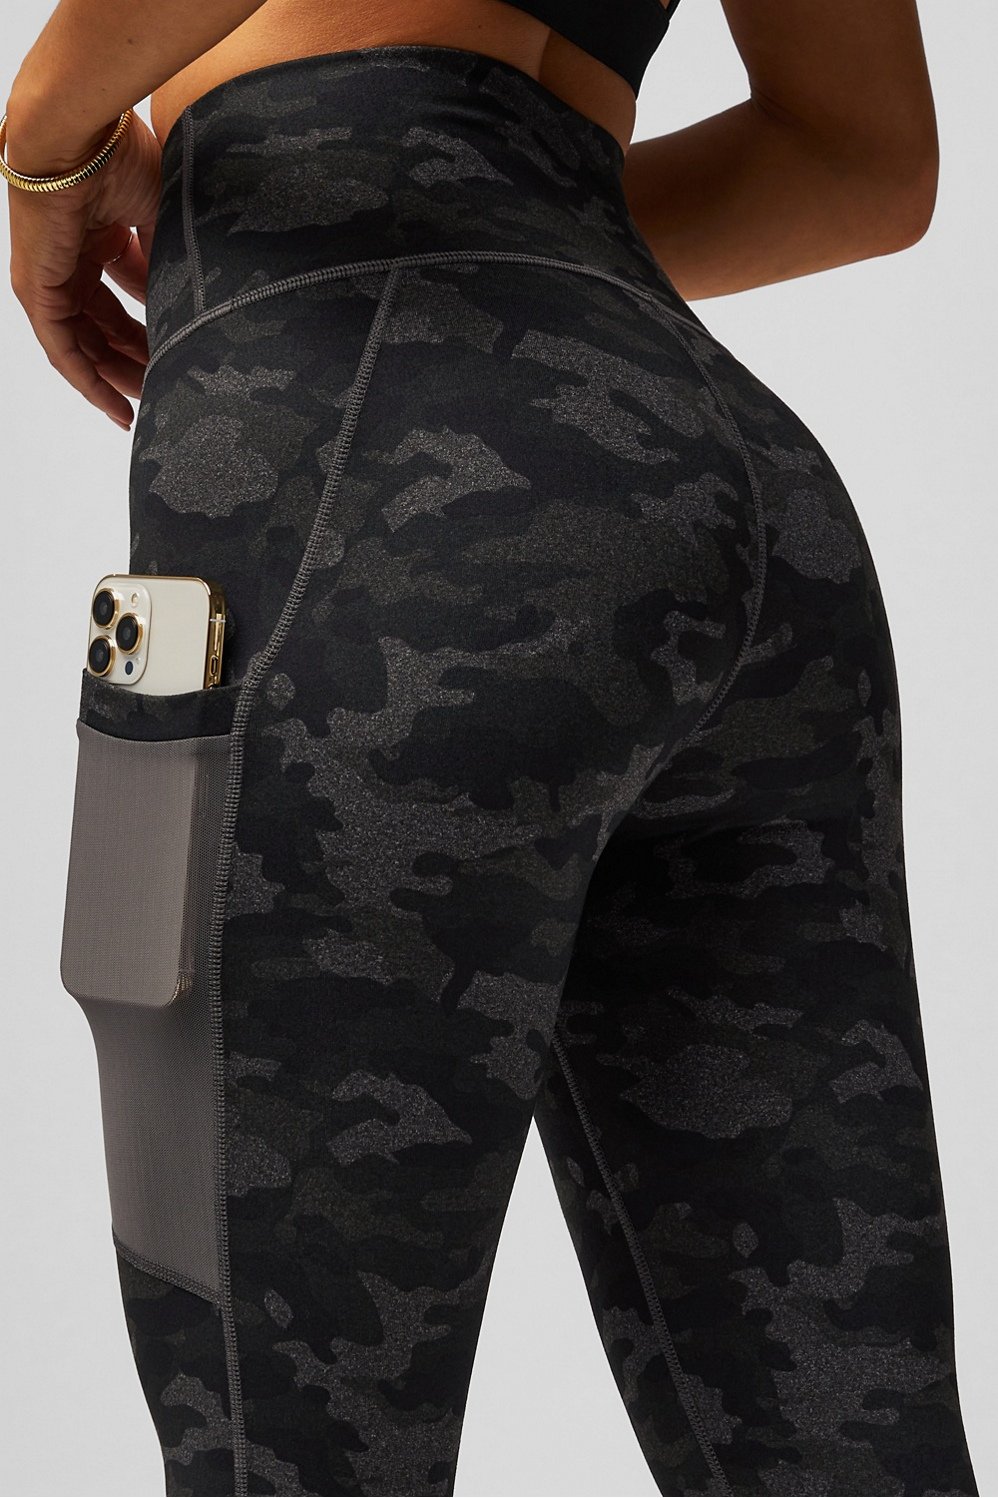 Fabletics PowerHold Leggings Blue Size XS - $22 (51% Off Retail) - From Chae